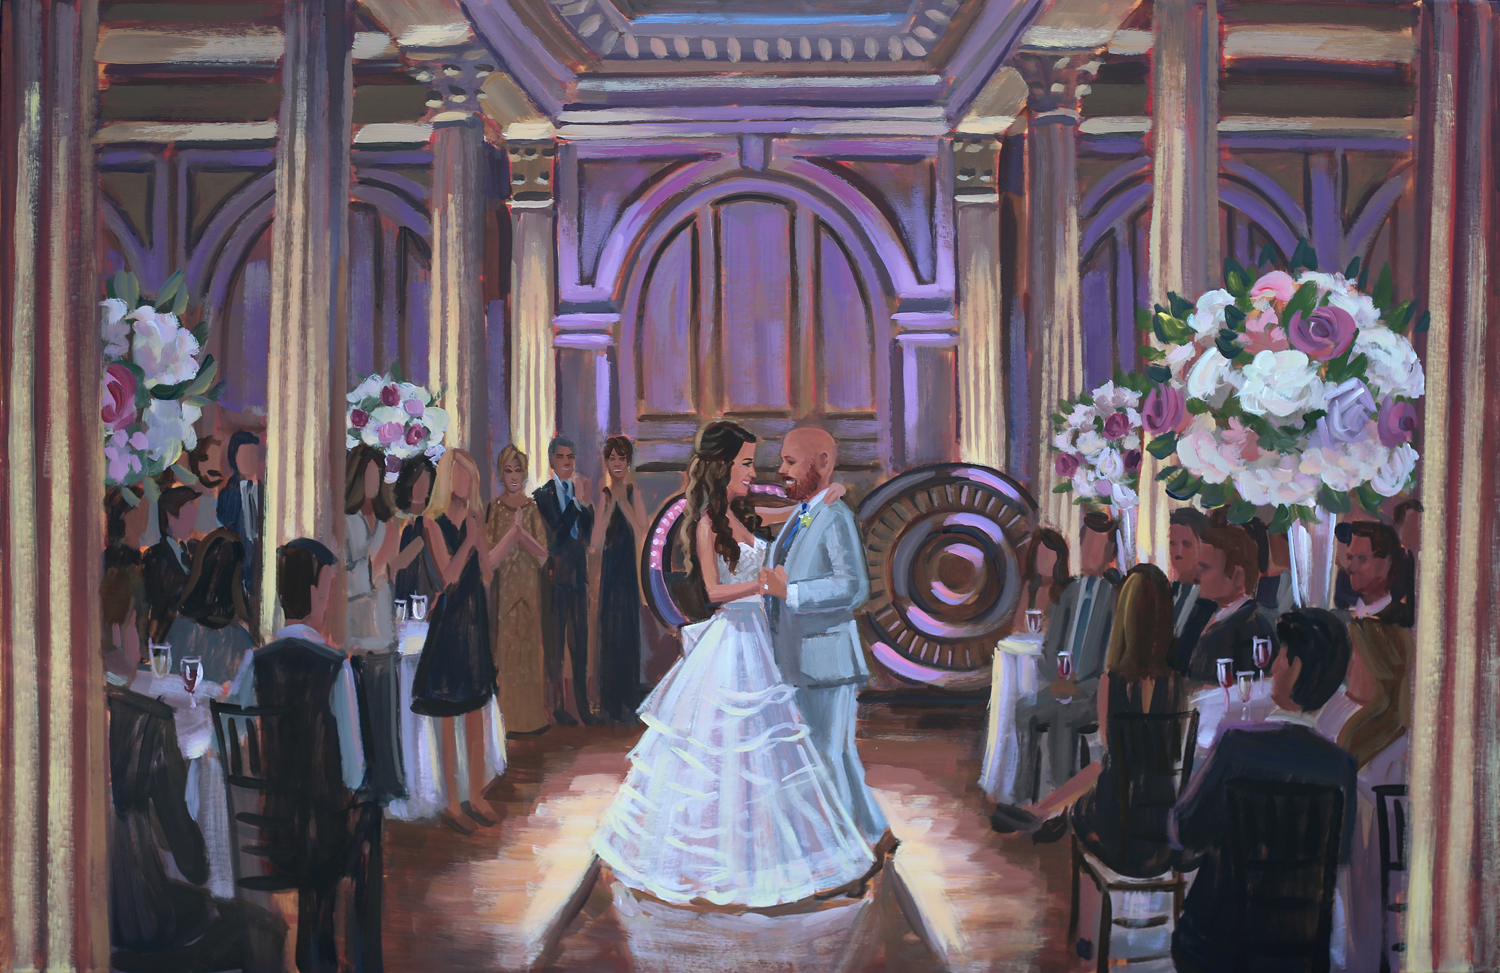 Live Wedding Painter, Ben Keys, captured Rob + Leslie's first dance at their reception held in historic downtown St. Augustine's Treasury on the Plaza.